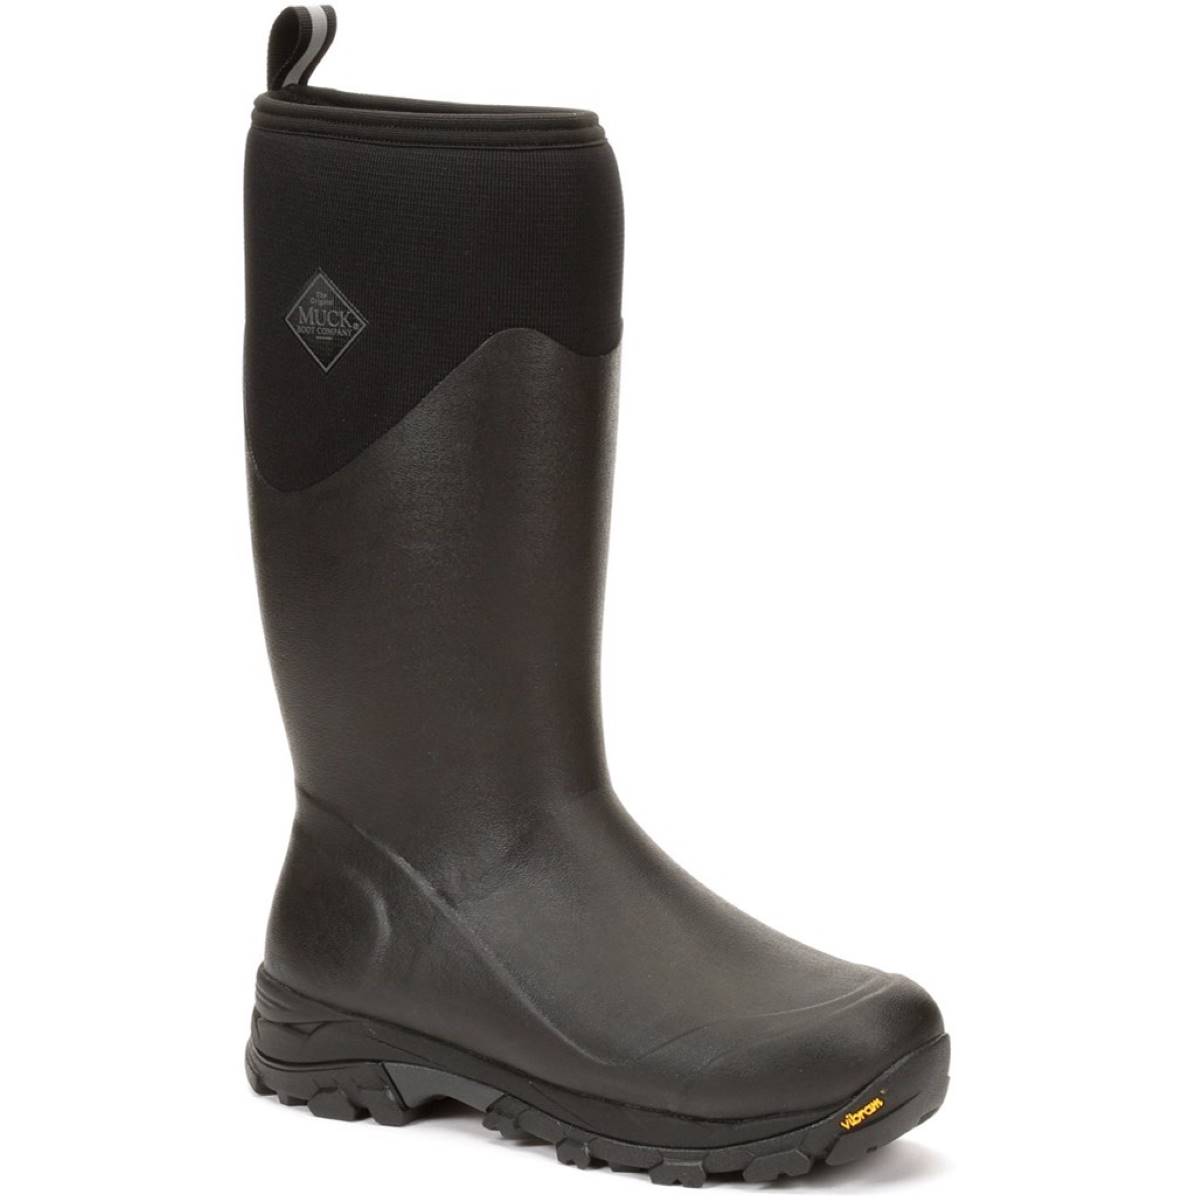 Muck Boots Arctic Ice Tall Black Mens boots AVTVA-000 in a Plain Rubber in Size 13